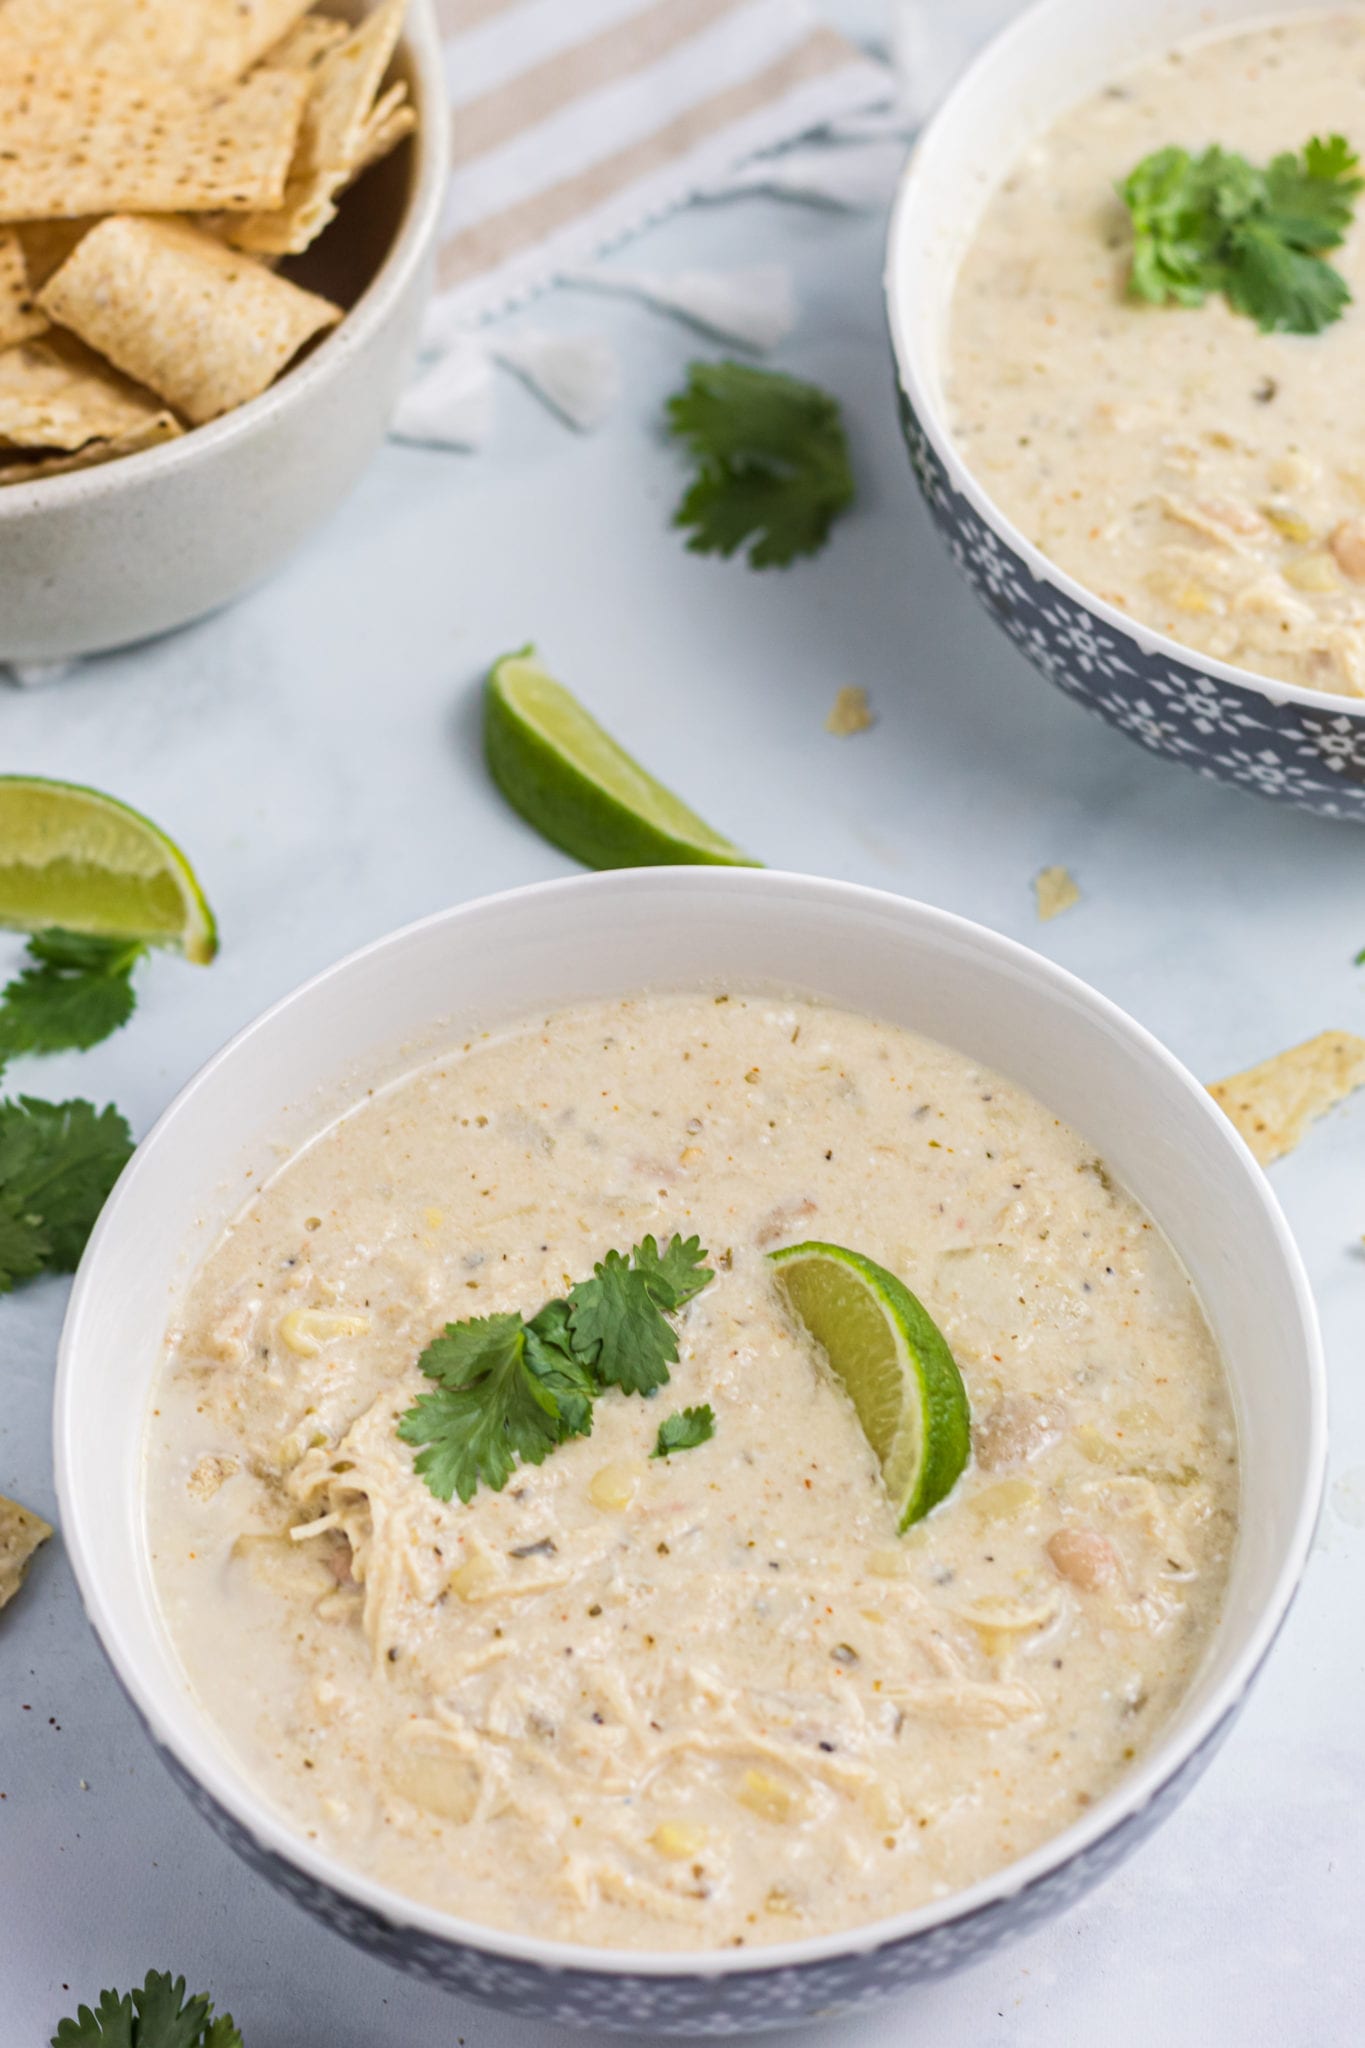 White Chicken Chili | What Beans Should You Use?